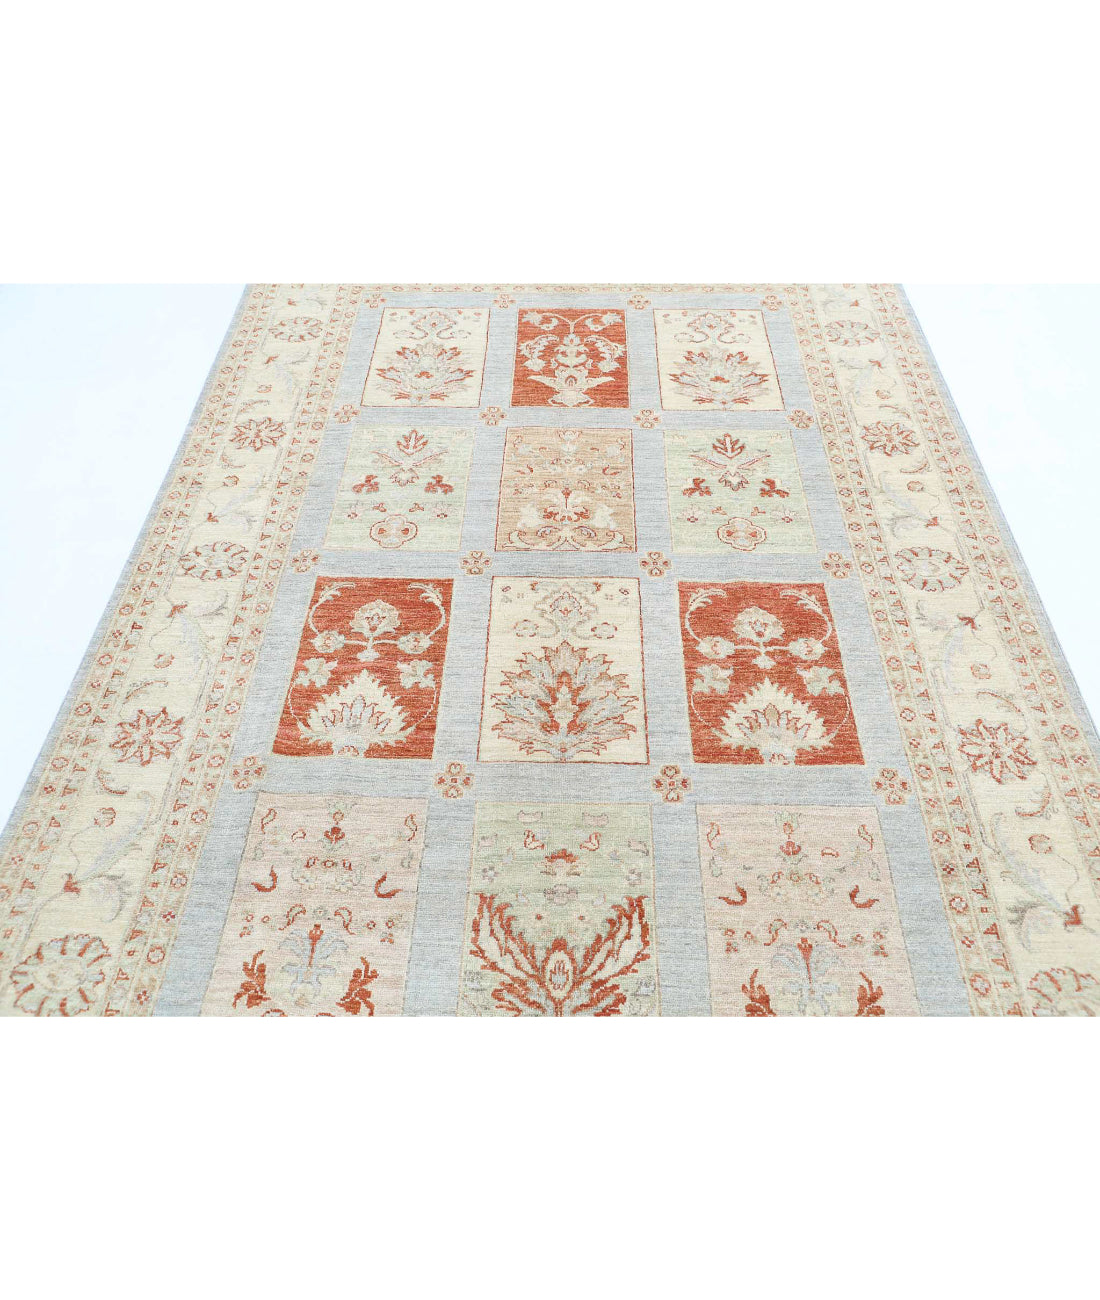 Hand Knotted Serenity Wool Rug - 5'7'' x 8'6'' 5'7'' x 8'6'' (168 X 255) / Blue / Ivory